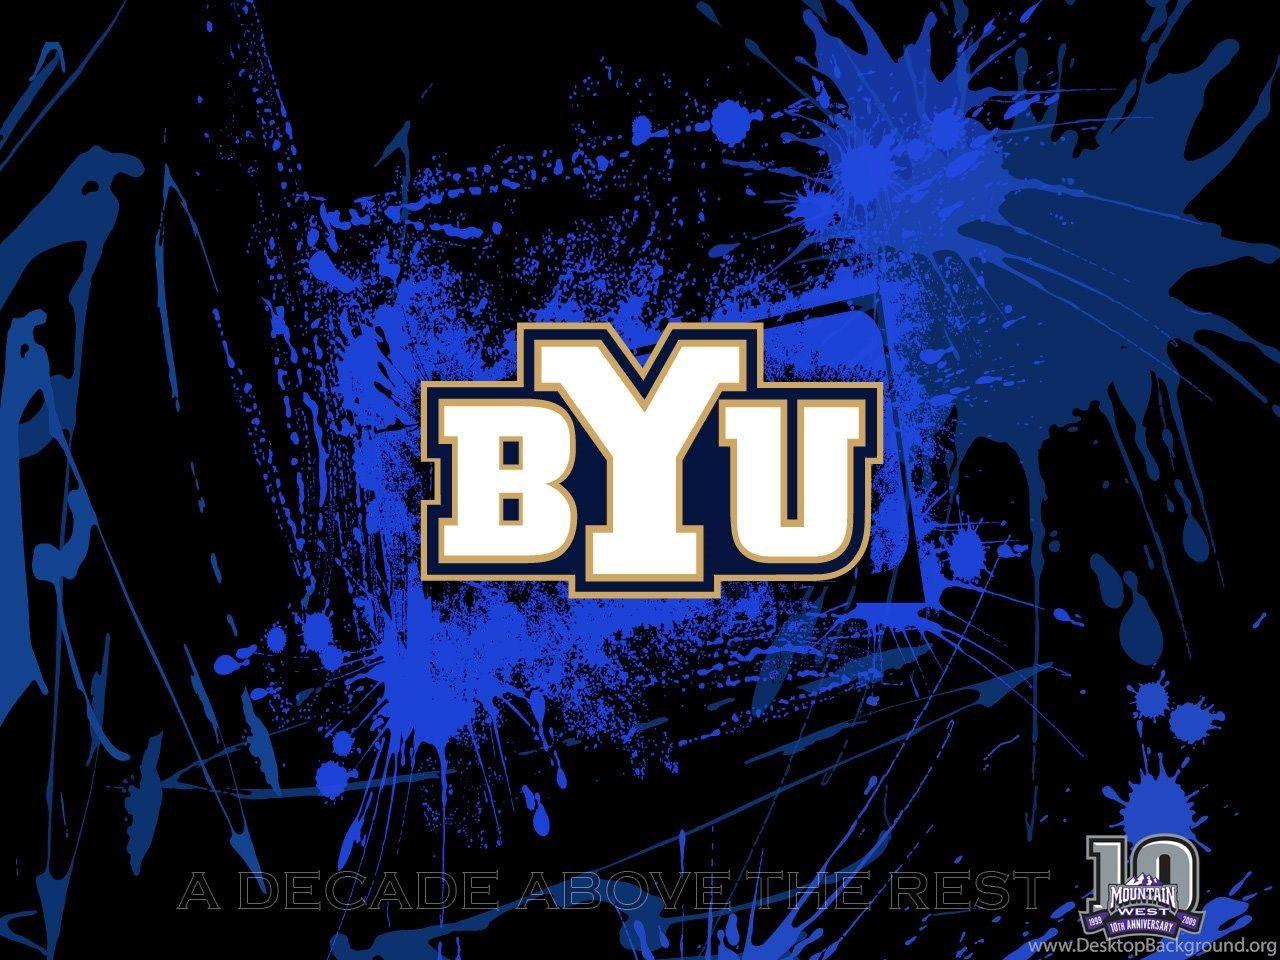 BYU FOOTBALL on Twitter 𝐍𝐄𝐖 𝐖𝐀𝐋𝐋𝐏𝐀𝐏𝐄𝐑𝐒 check out this weeks  wallpapers  BYUFOOTBALL  kslsports httpstco6KGnDVuXpE  Twitter